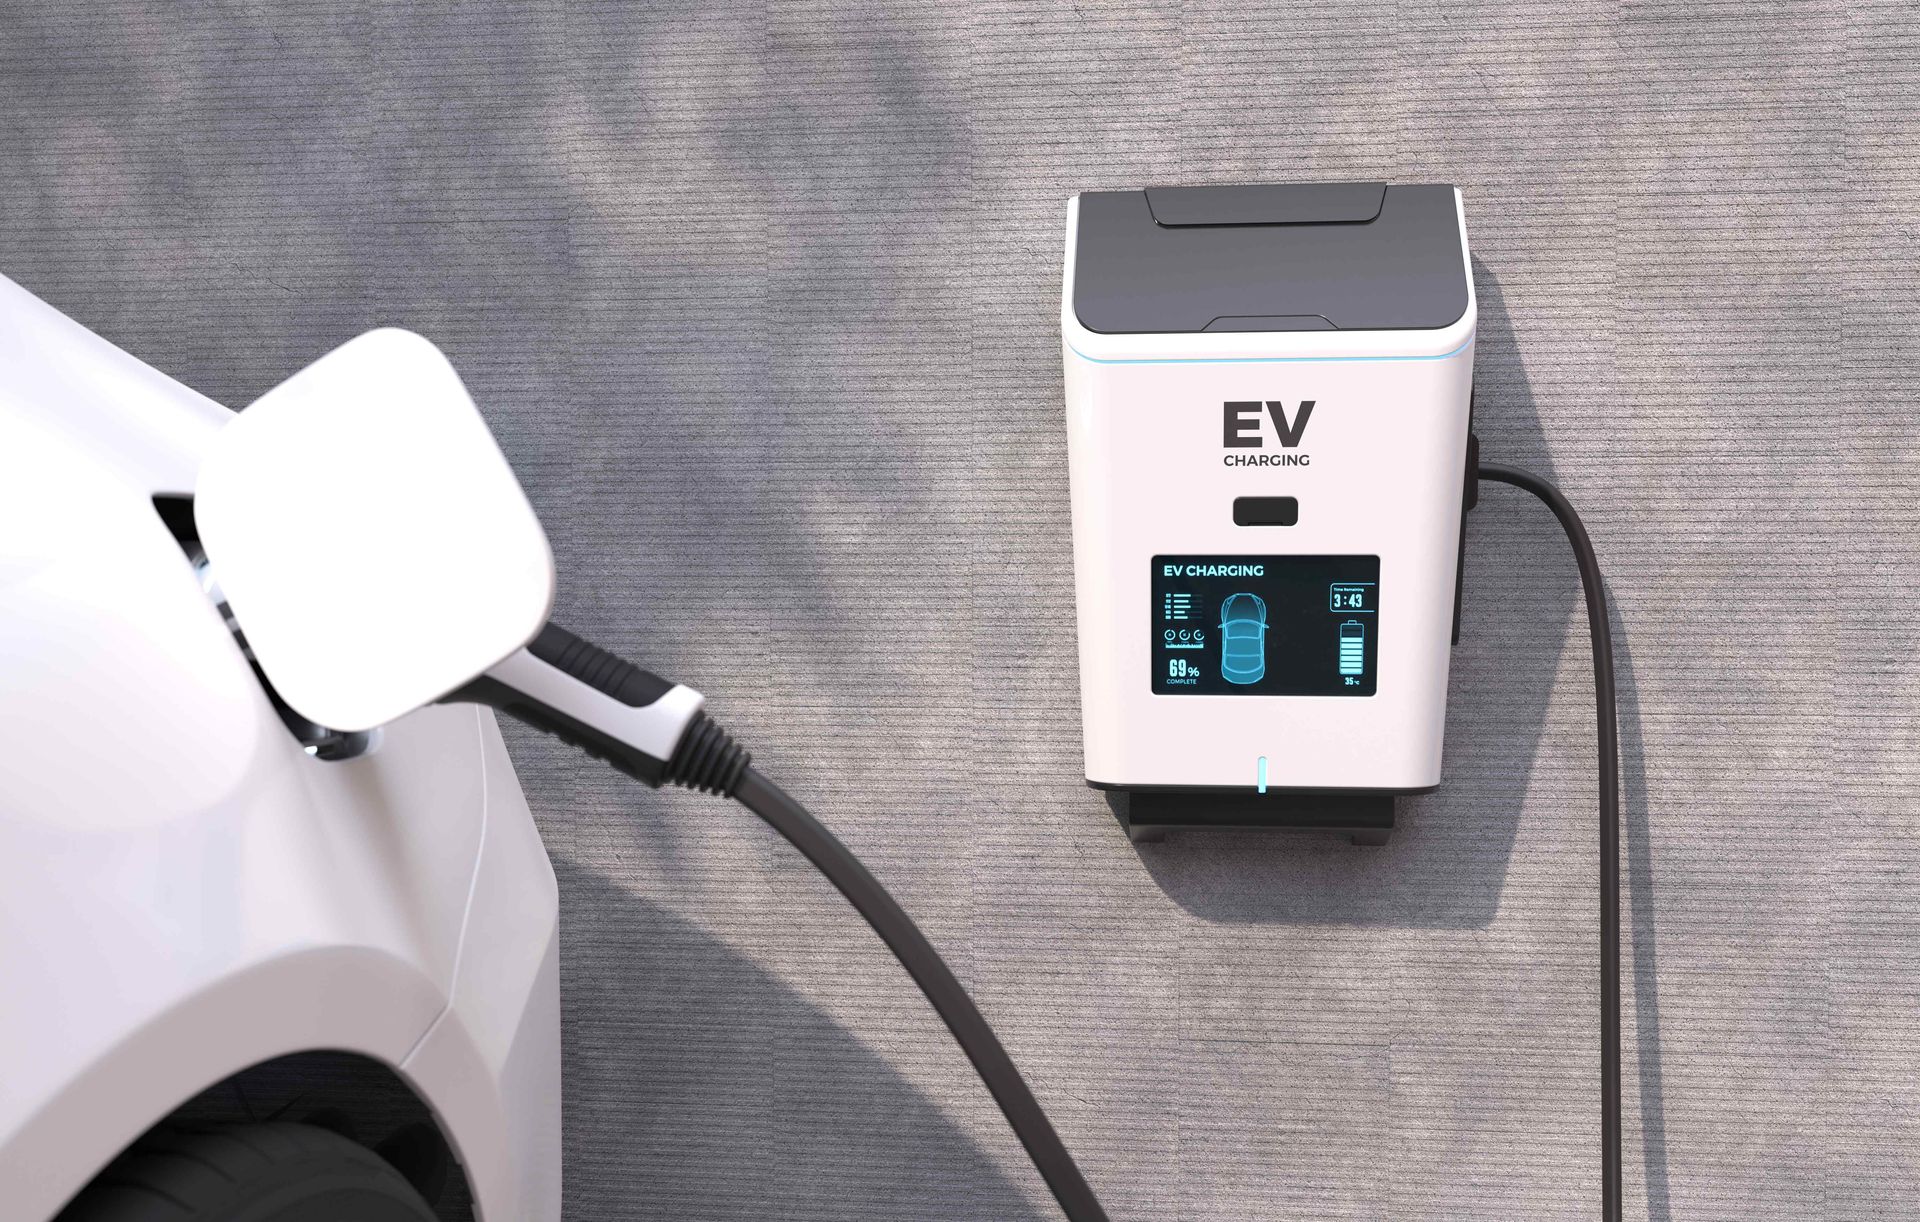 Modern Home EV Charging Station for Quick Charging of Electric Cars At Home